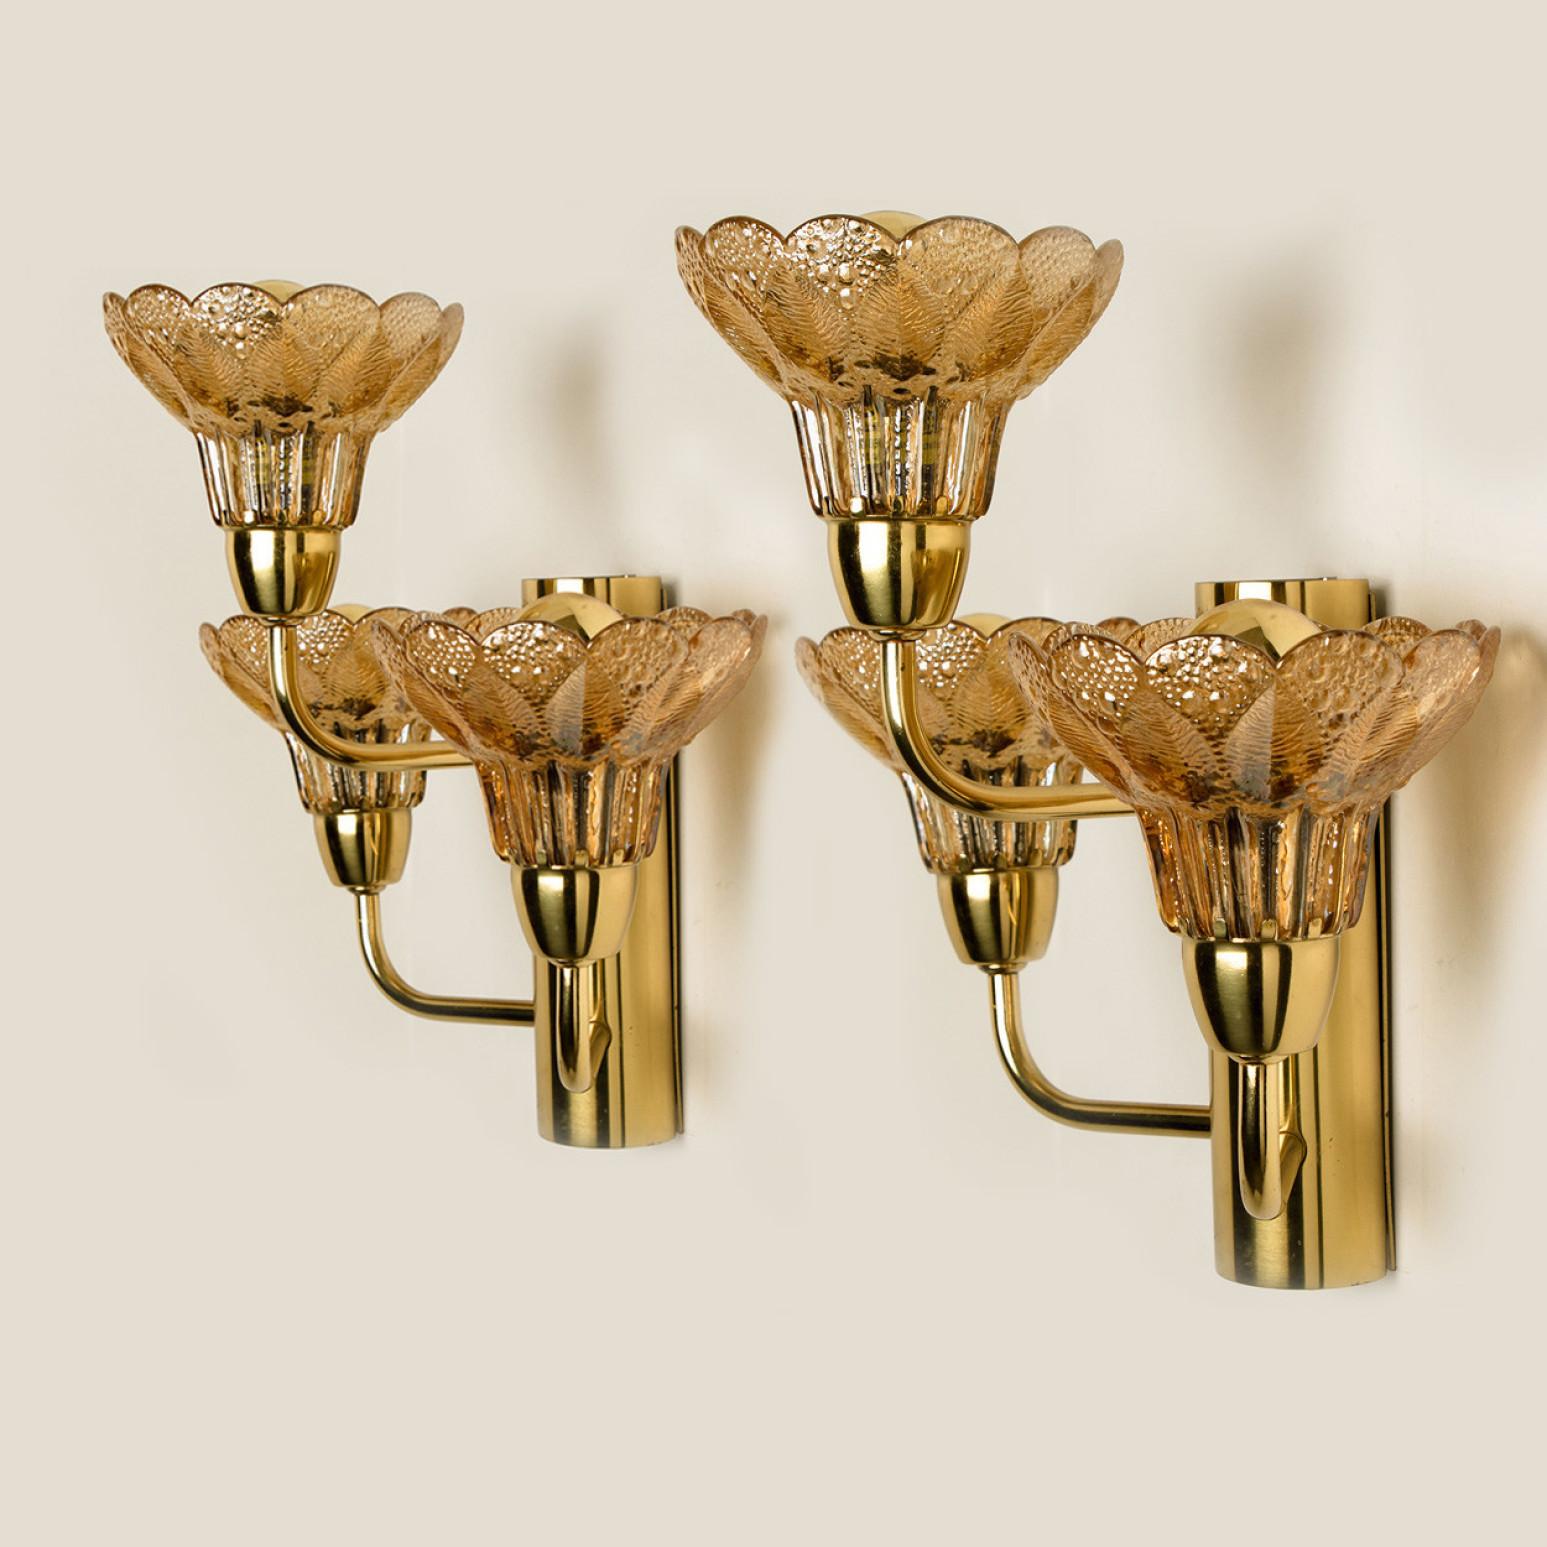 This flower like wall sconce is made of brass with glass flowers and are from Germany. The sconce shows three amber glass flowers, each contains one light bulb.

Each glass flower shade has textured petals and is securely screwed in place. Each